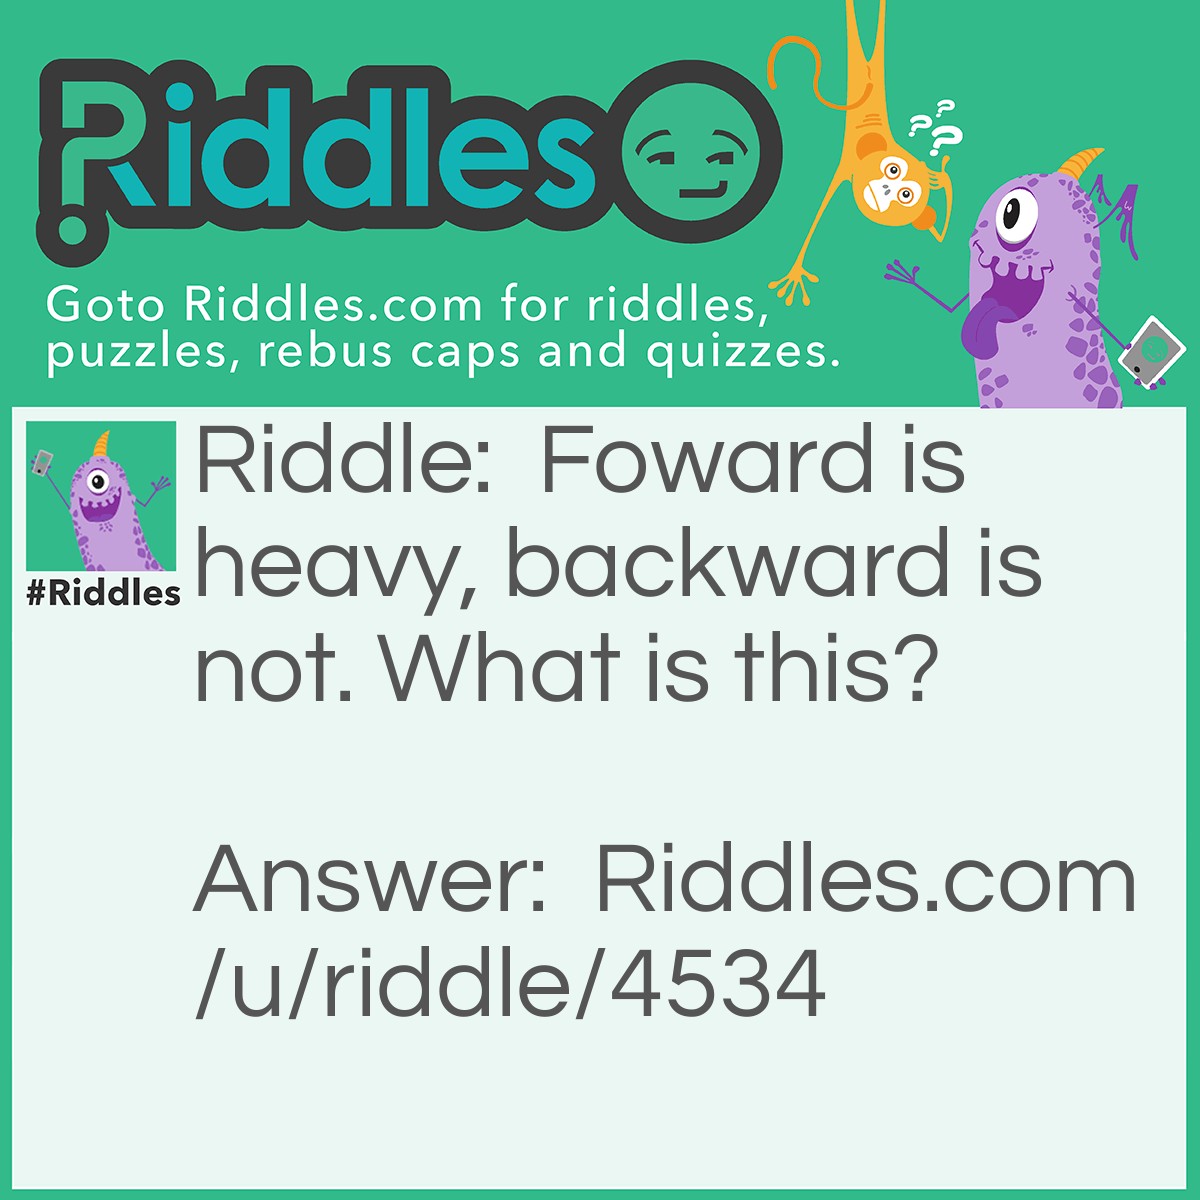 Riddle: Forward is heavy, backward is not. What is this? Answer: Ton, because forward is just a ton, backward is the word "not".